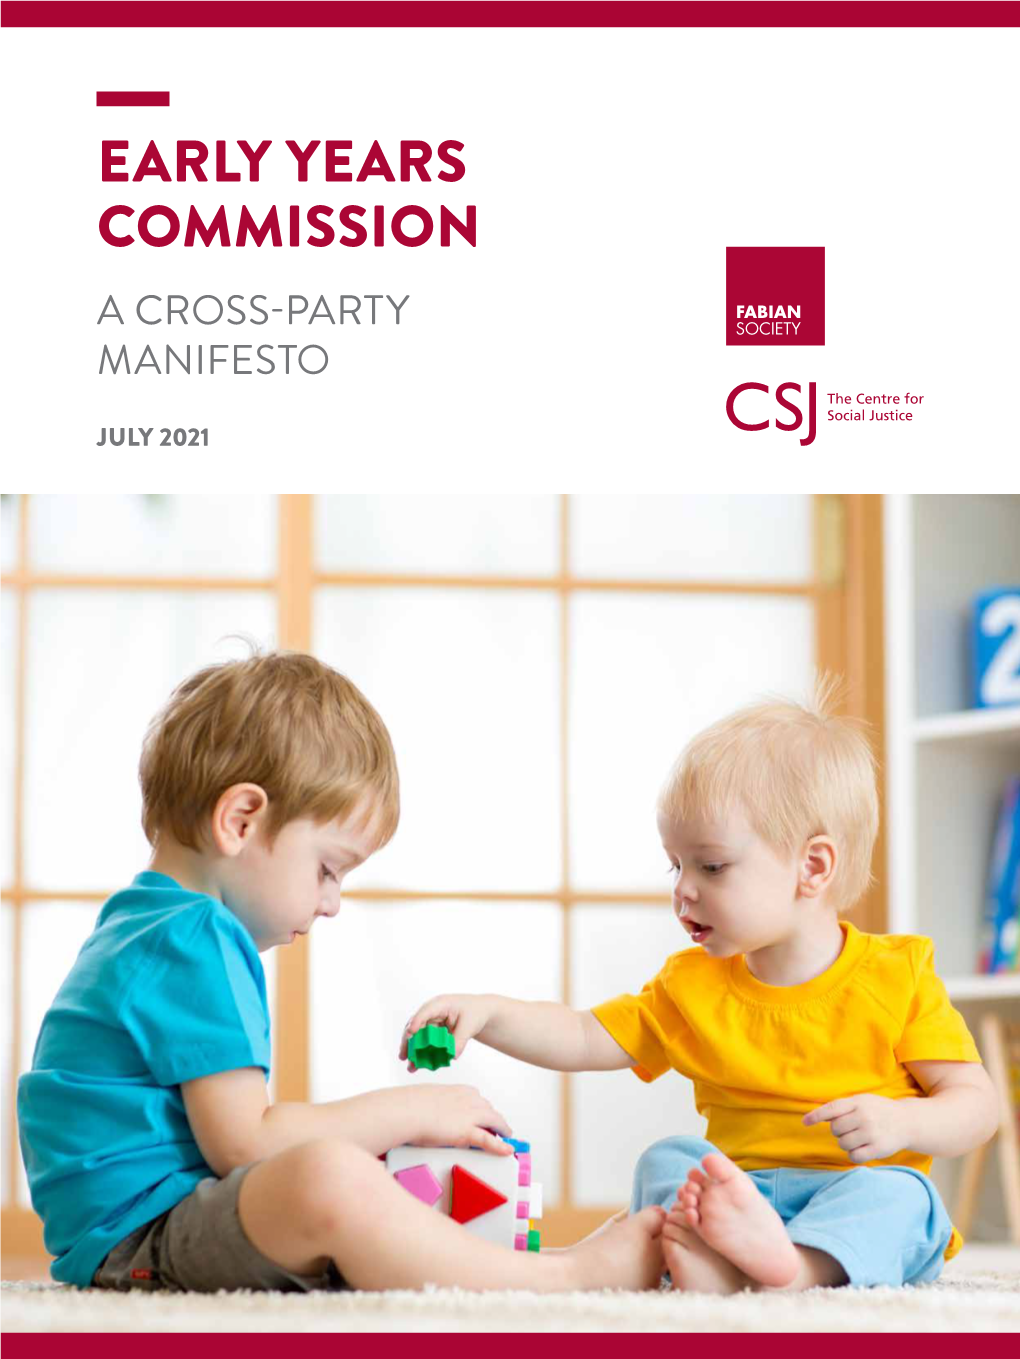 Early Years Commission – a Cross Party Manifesto © the Centre for Social Justice and the Fabian Society, 2021